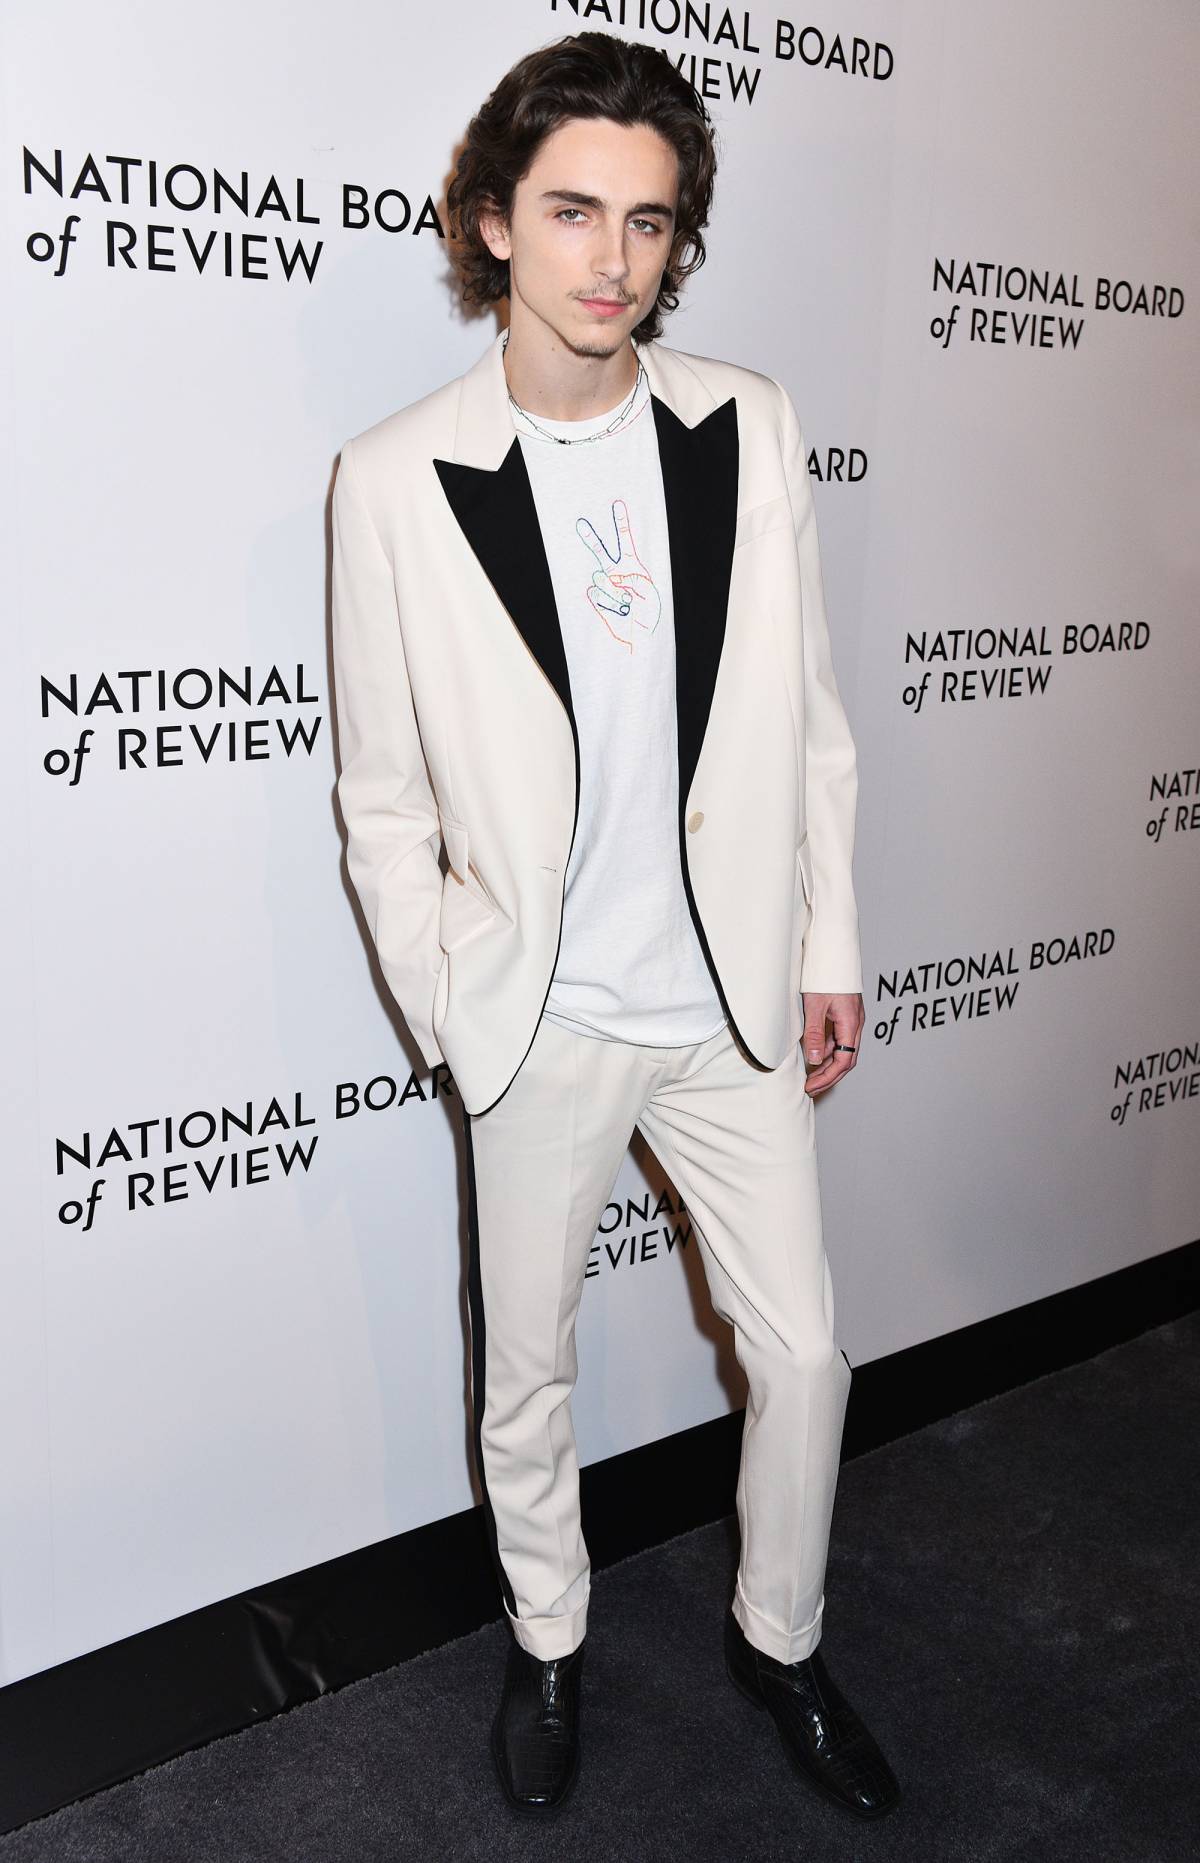 Timothée Chalamet fans cause police to shut down red carpet at